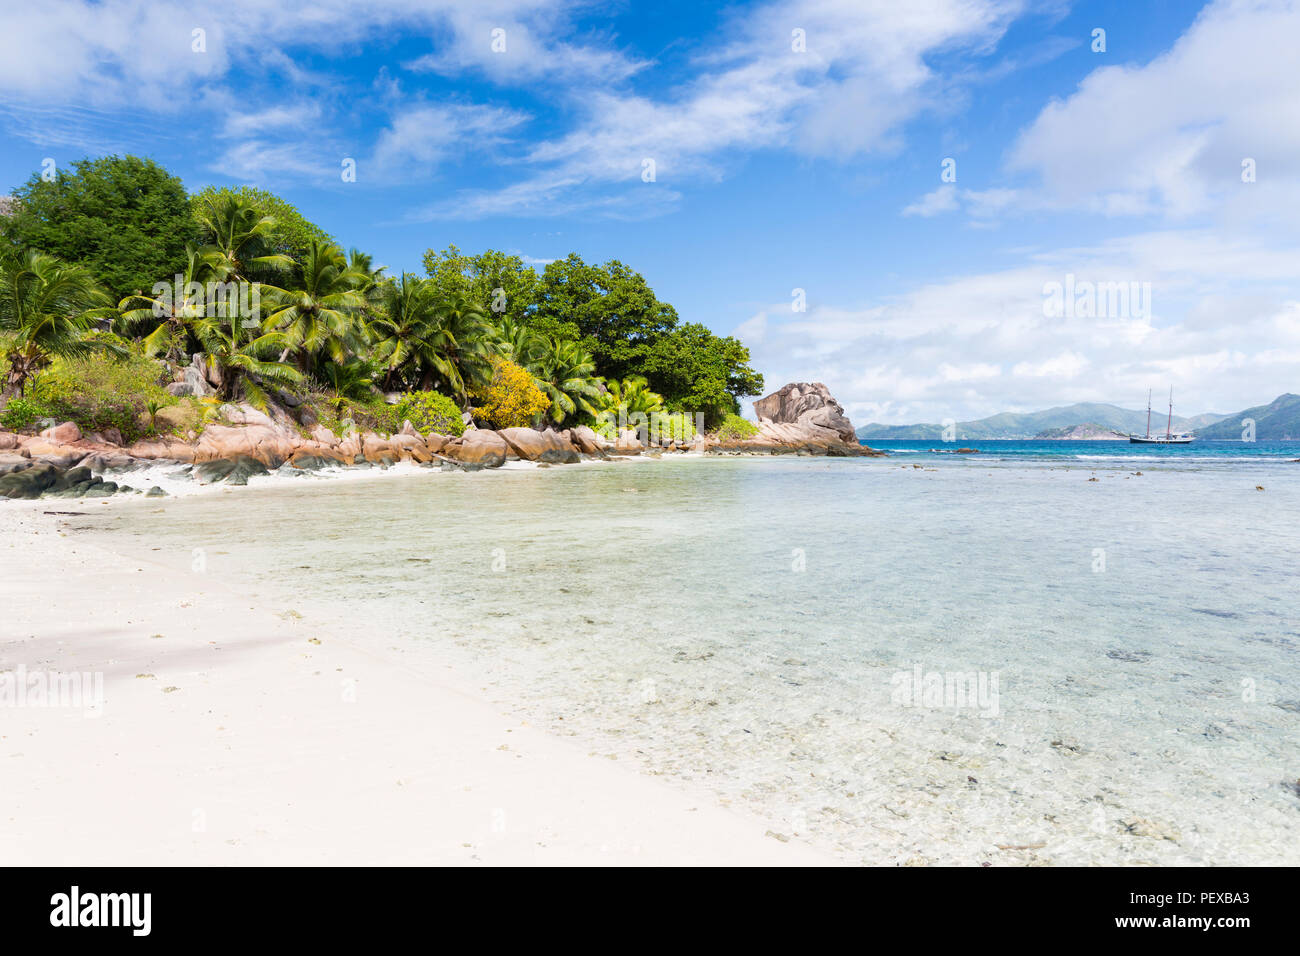 Low tide at Anse Severe in La Digue, Seychelles with some palm trees and granite rocks in the background Stock Photo